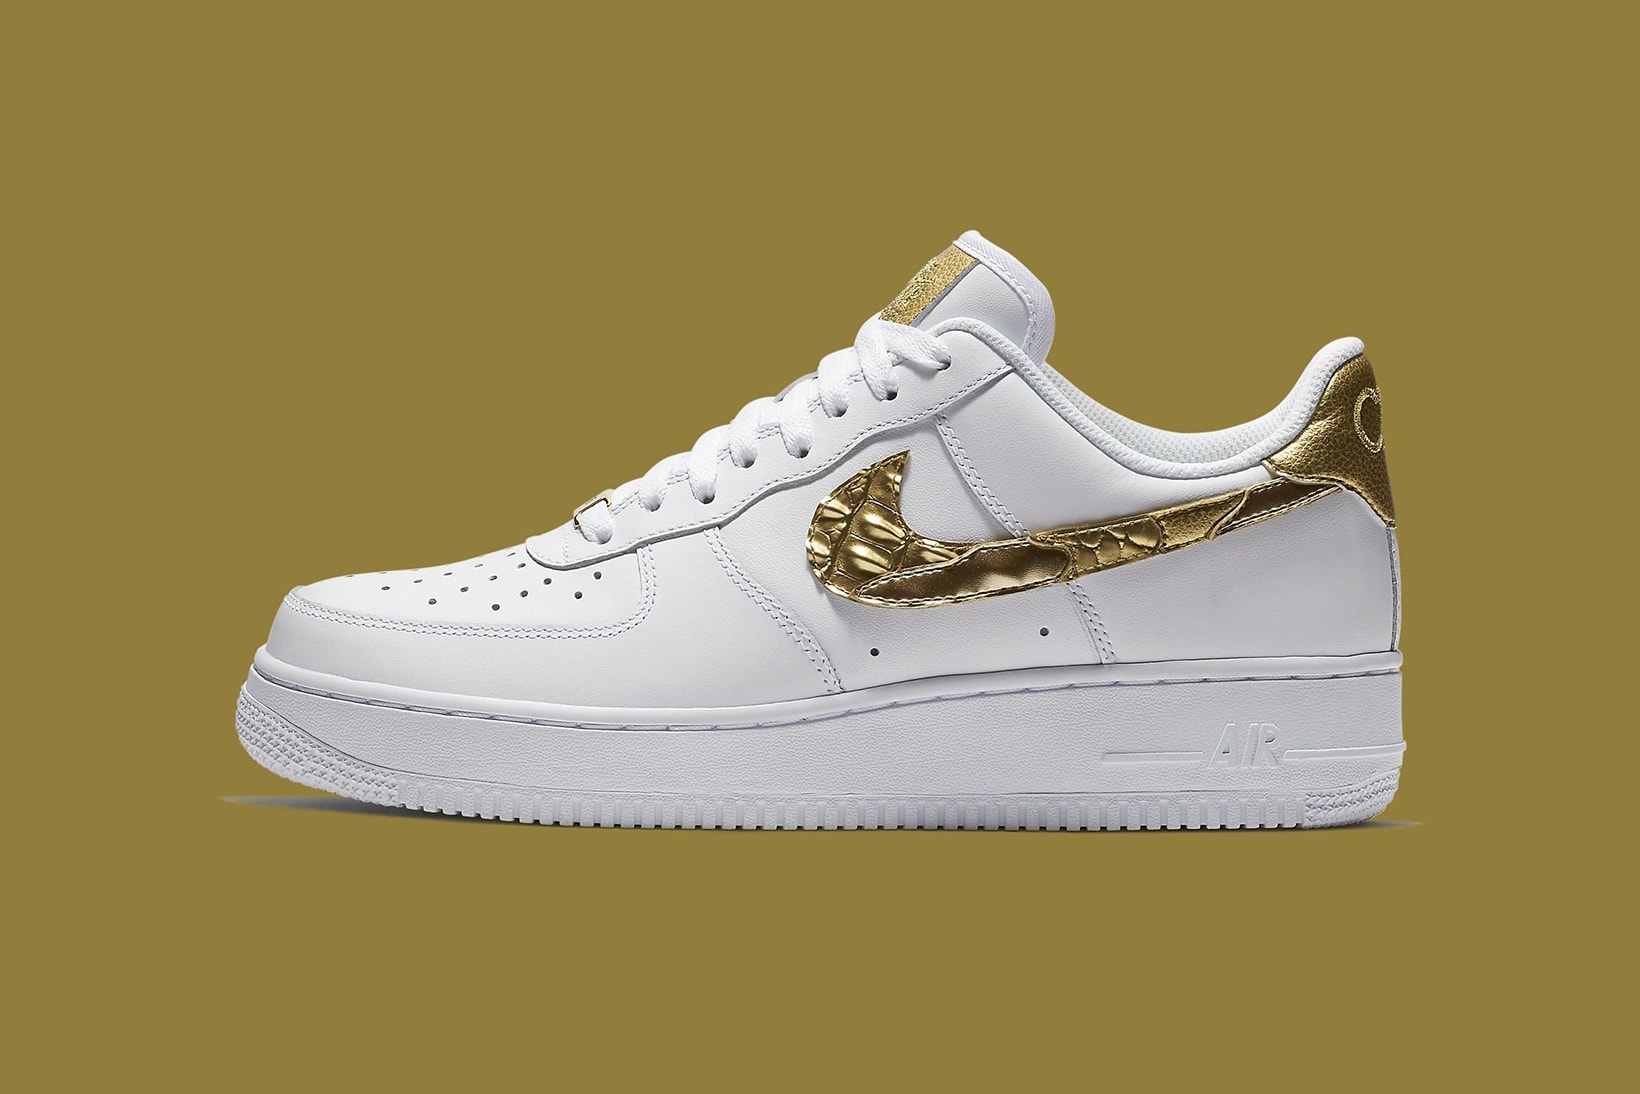 Nike Air Force 1 '07 LV8 Logo 2017 for Sale